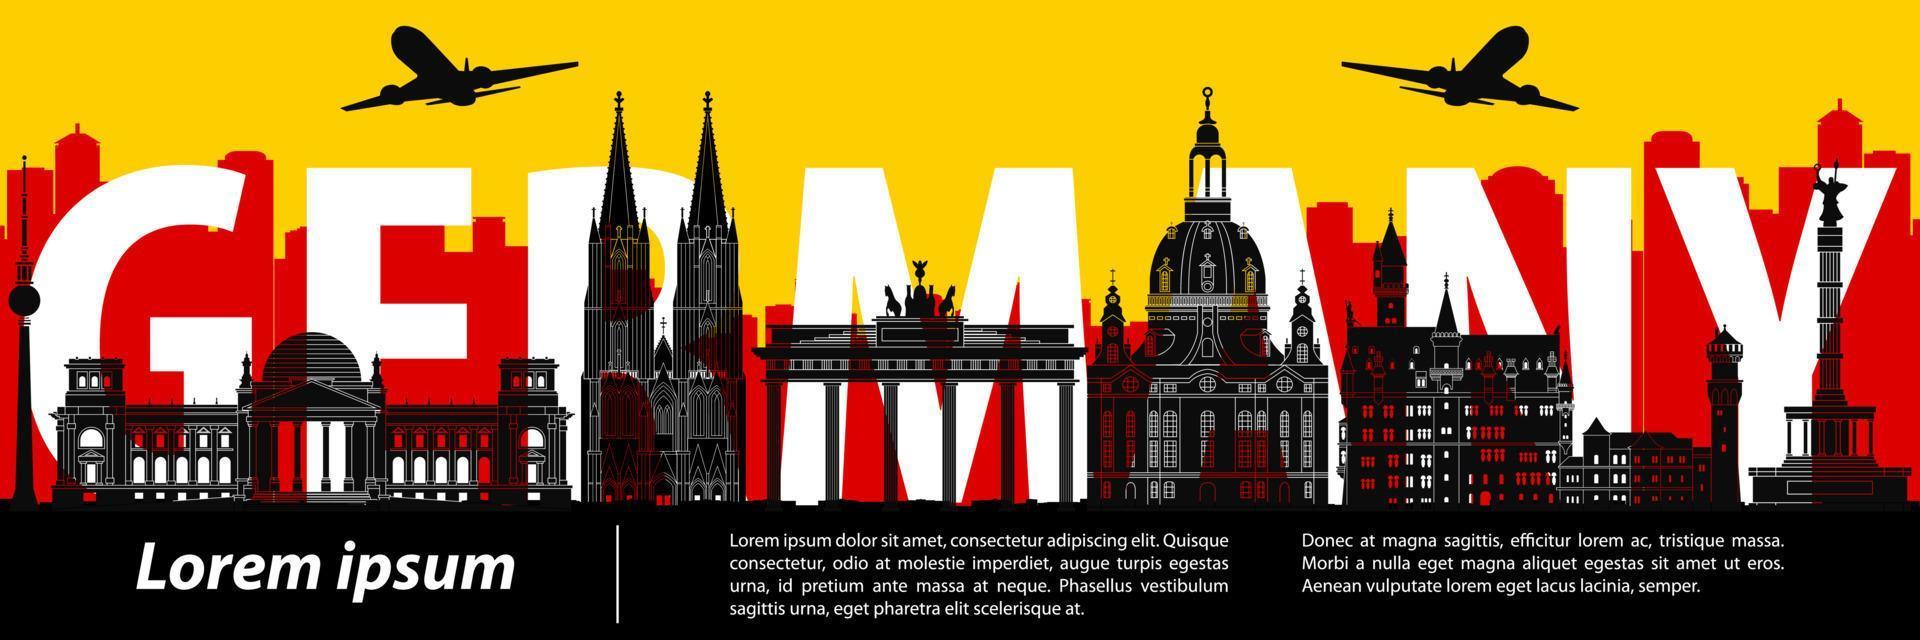 Germany famous landmark silhouette with red and yellow color design vector